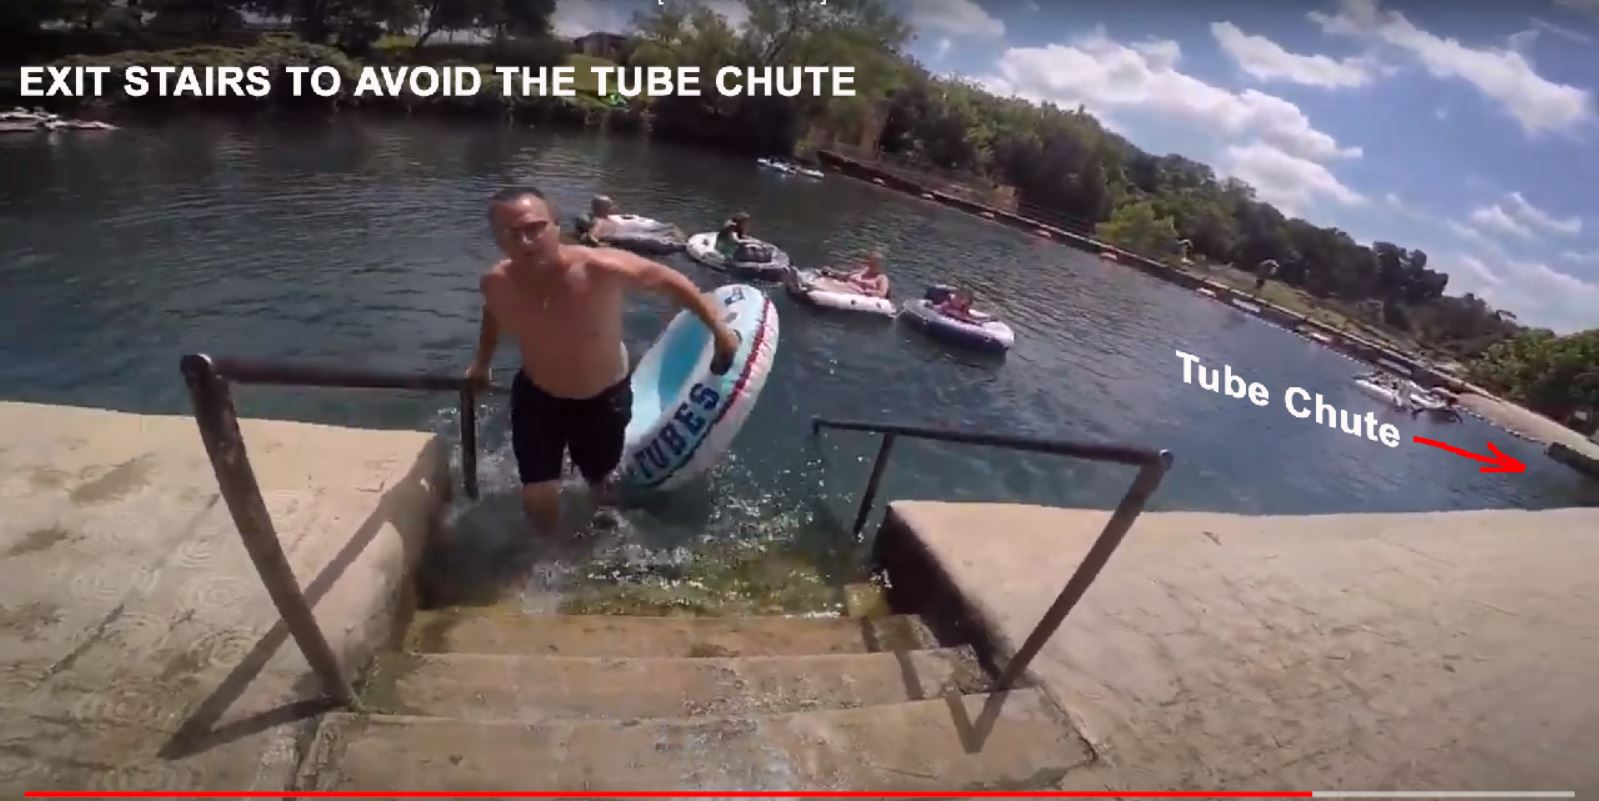 Use the handrails when exiting  the Comal River as the stairs may be slippery from algae growth - Texas Tubes